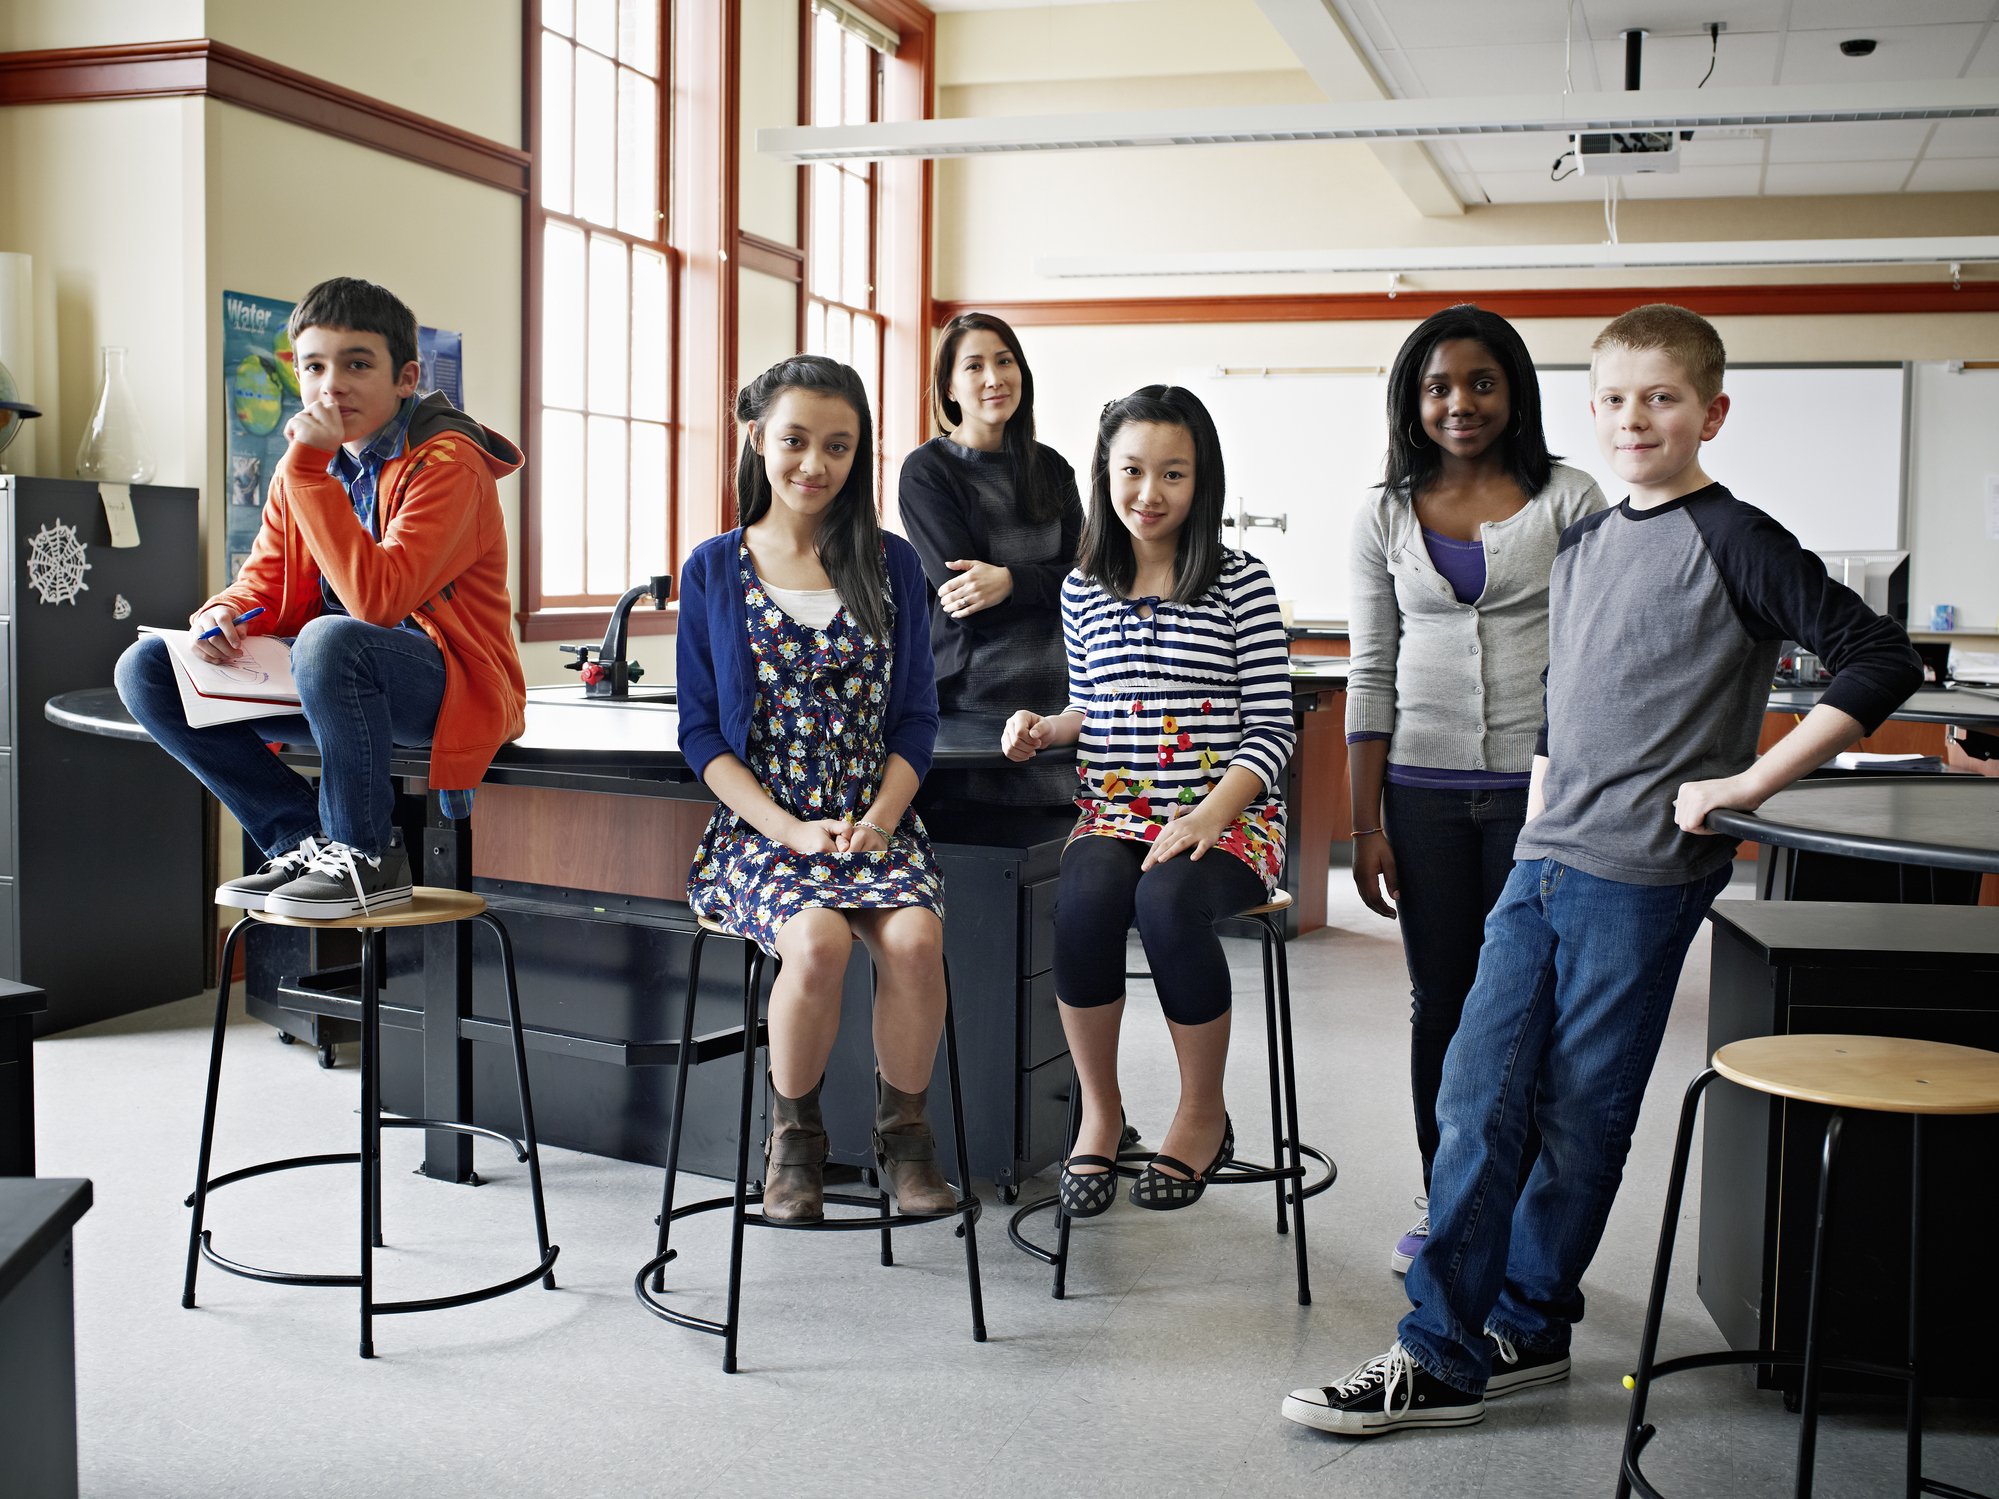 Group of young students with teacher in science lab classroom | Photo: Getty Images